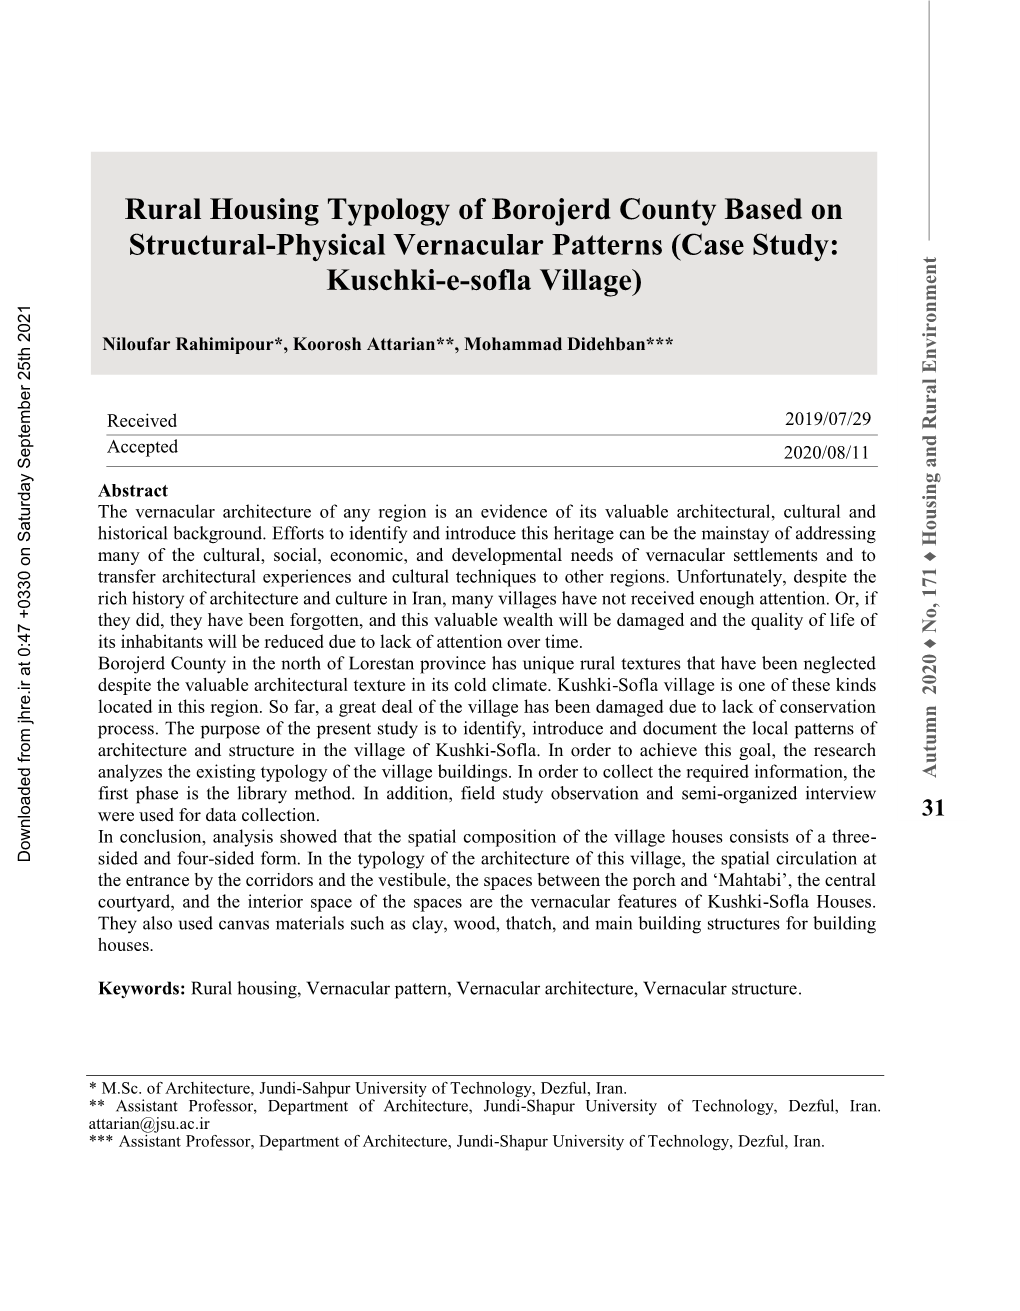 Rural Housing Typology of Boroujerd County Based on Structural